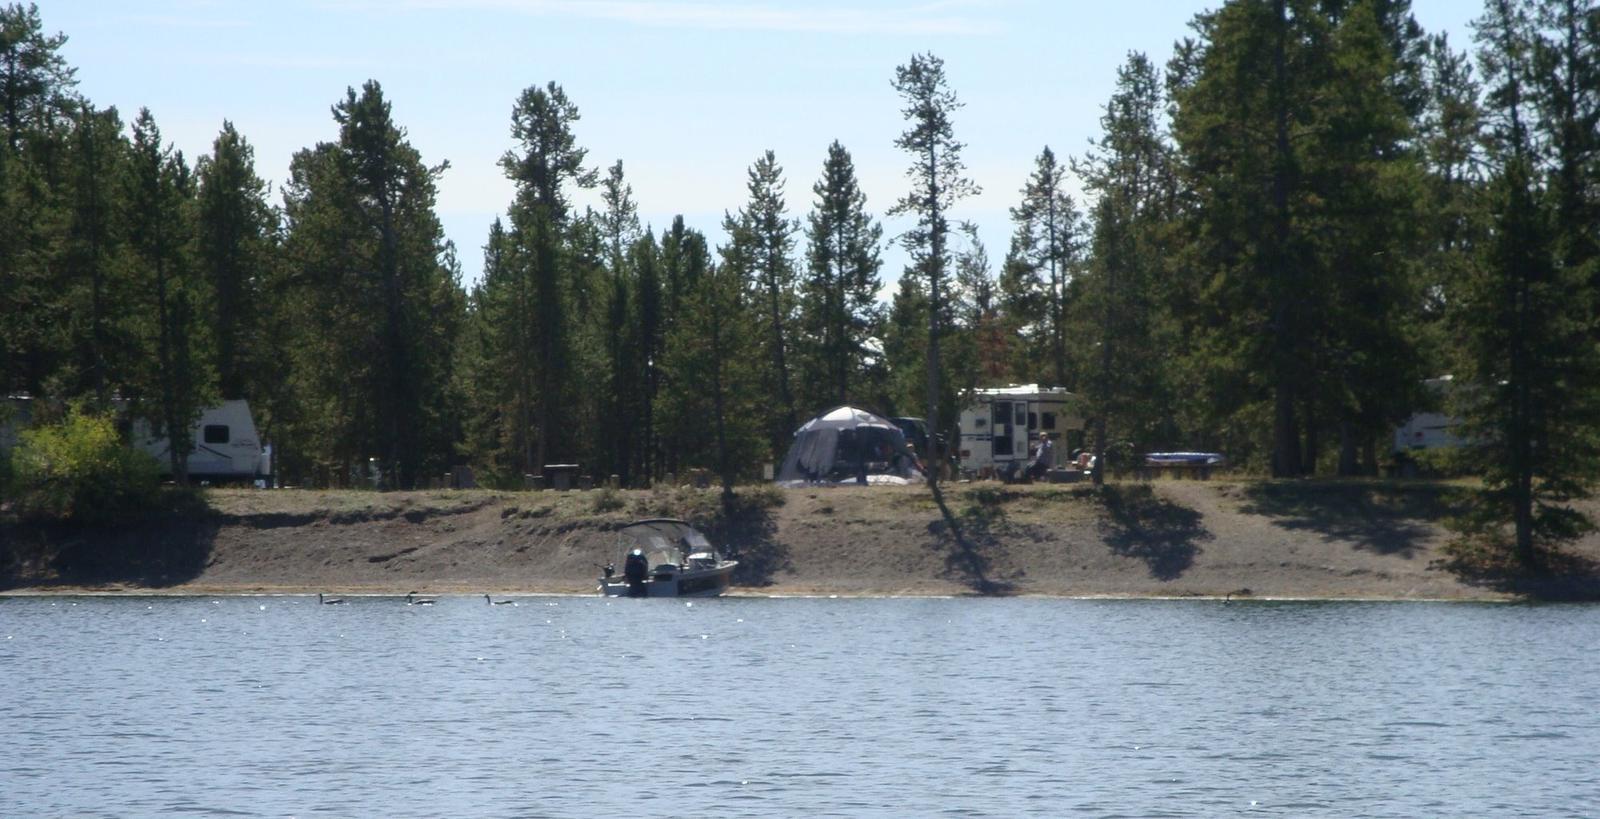 View from Hebgen Lake - Lake, boat and RV surrounded by pine treesLonesomehurst Campground